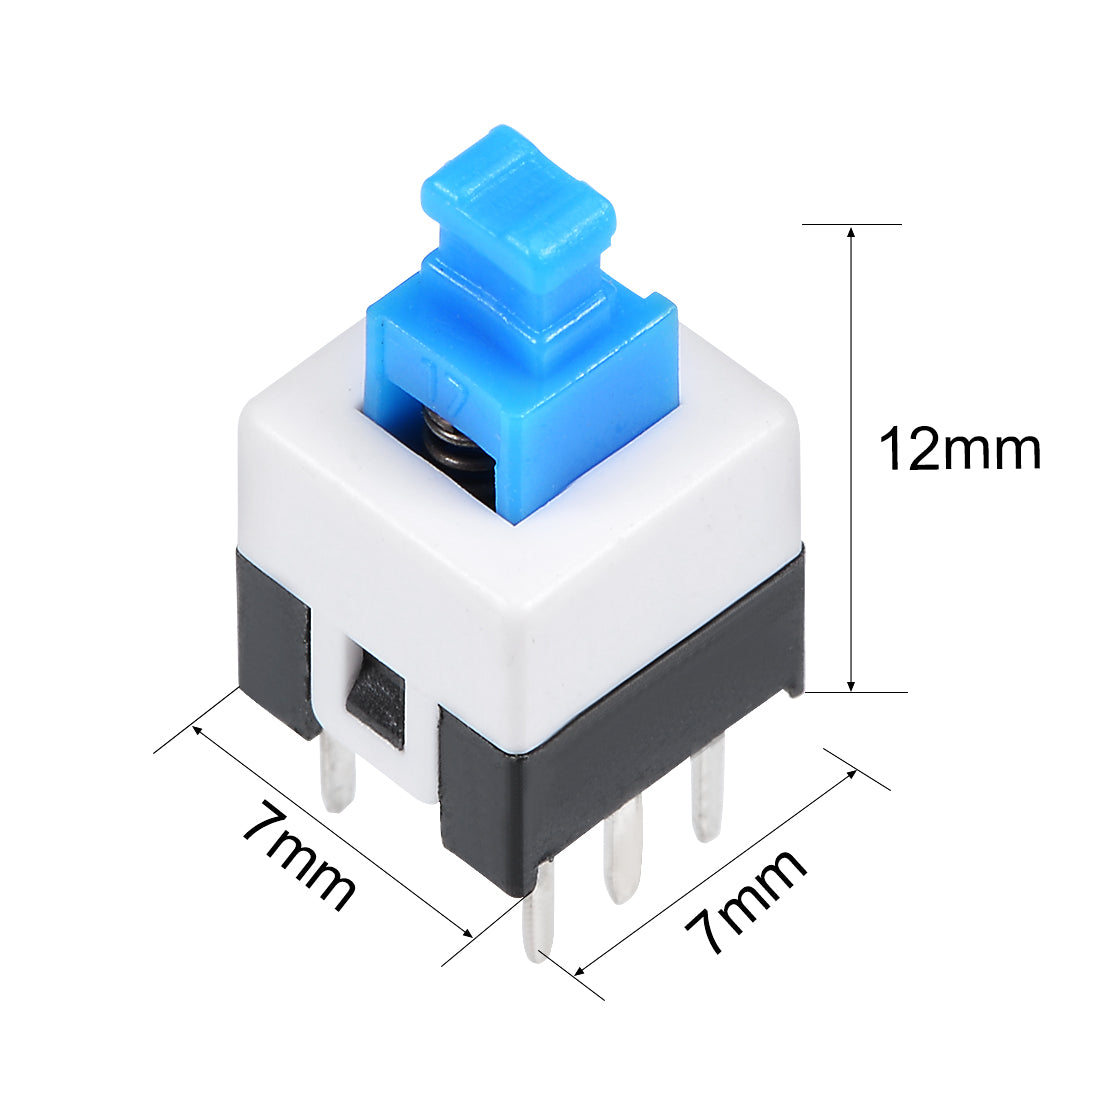 uxcell Uxcell 10 Pcs 6 Pin PCB Light Touch Locking Latching  Push Button Tact Tactile Switch 7 x 7 x 12mm